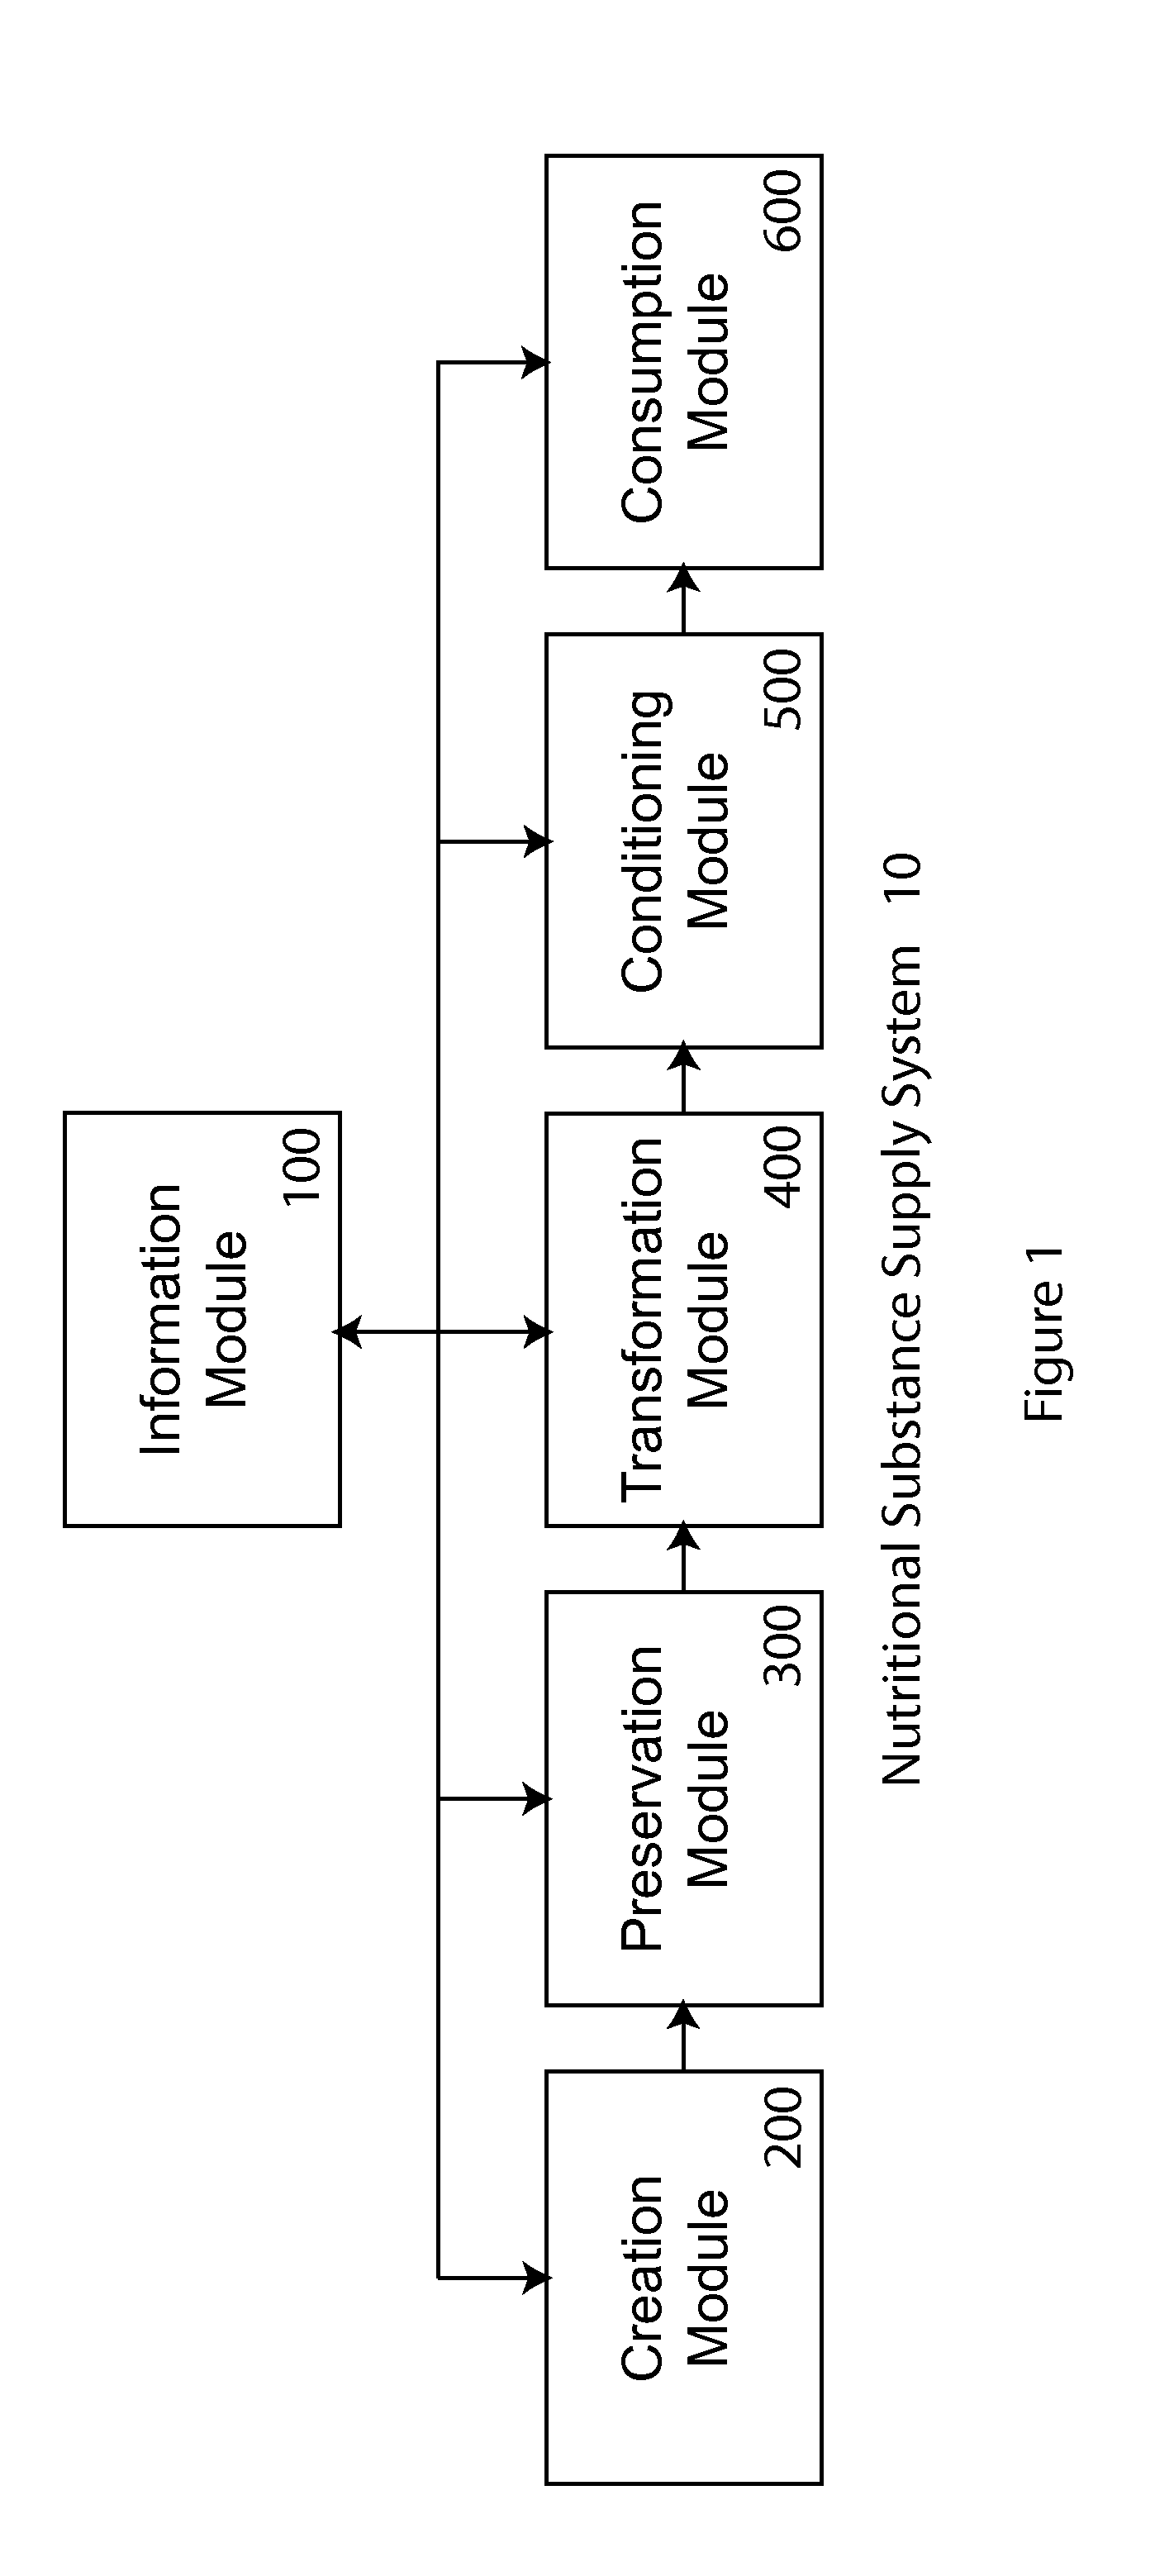 System for managing the nutritional content for nutritional substances